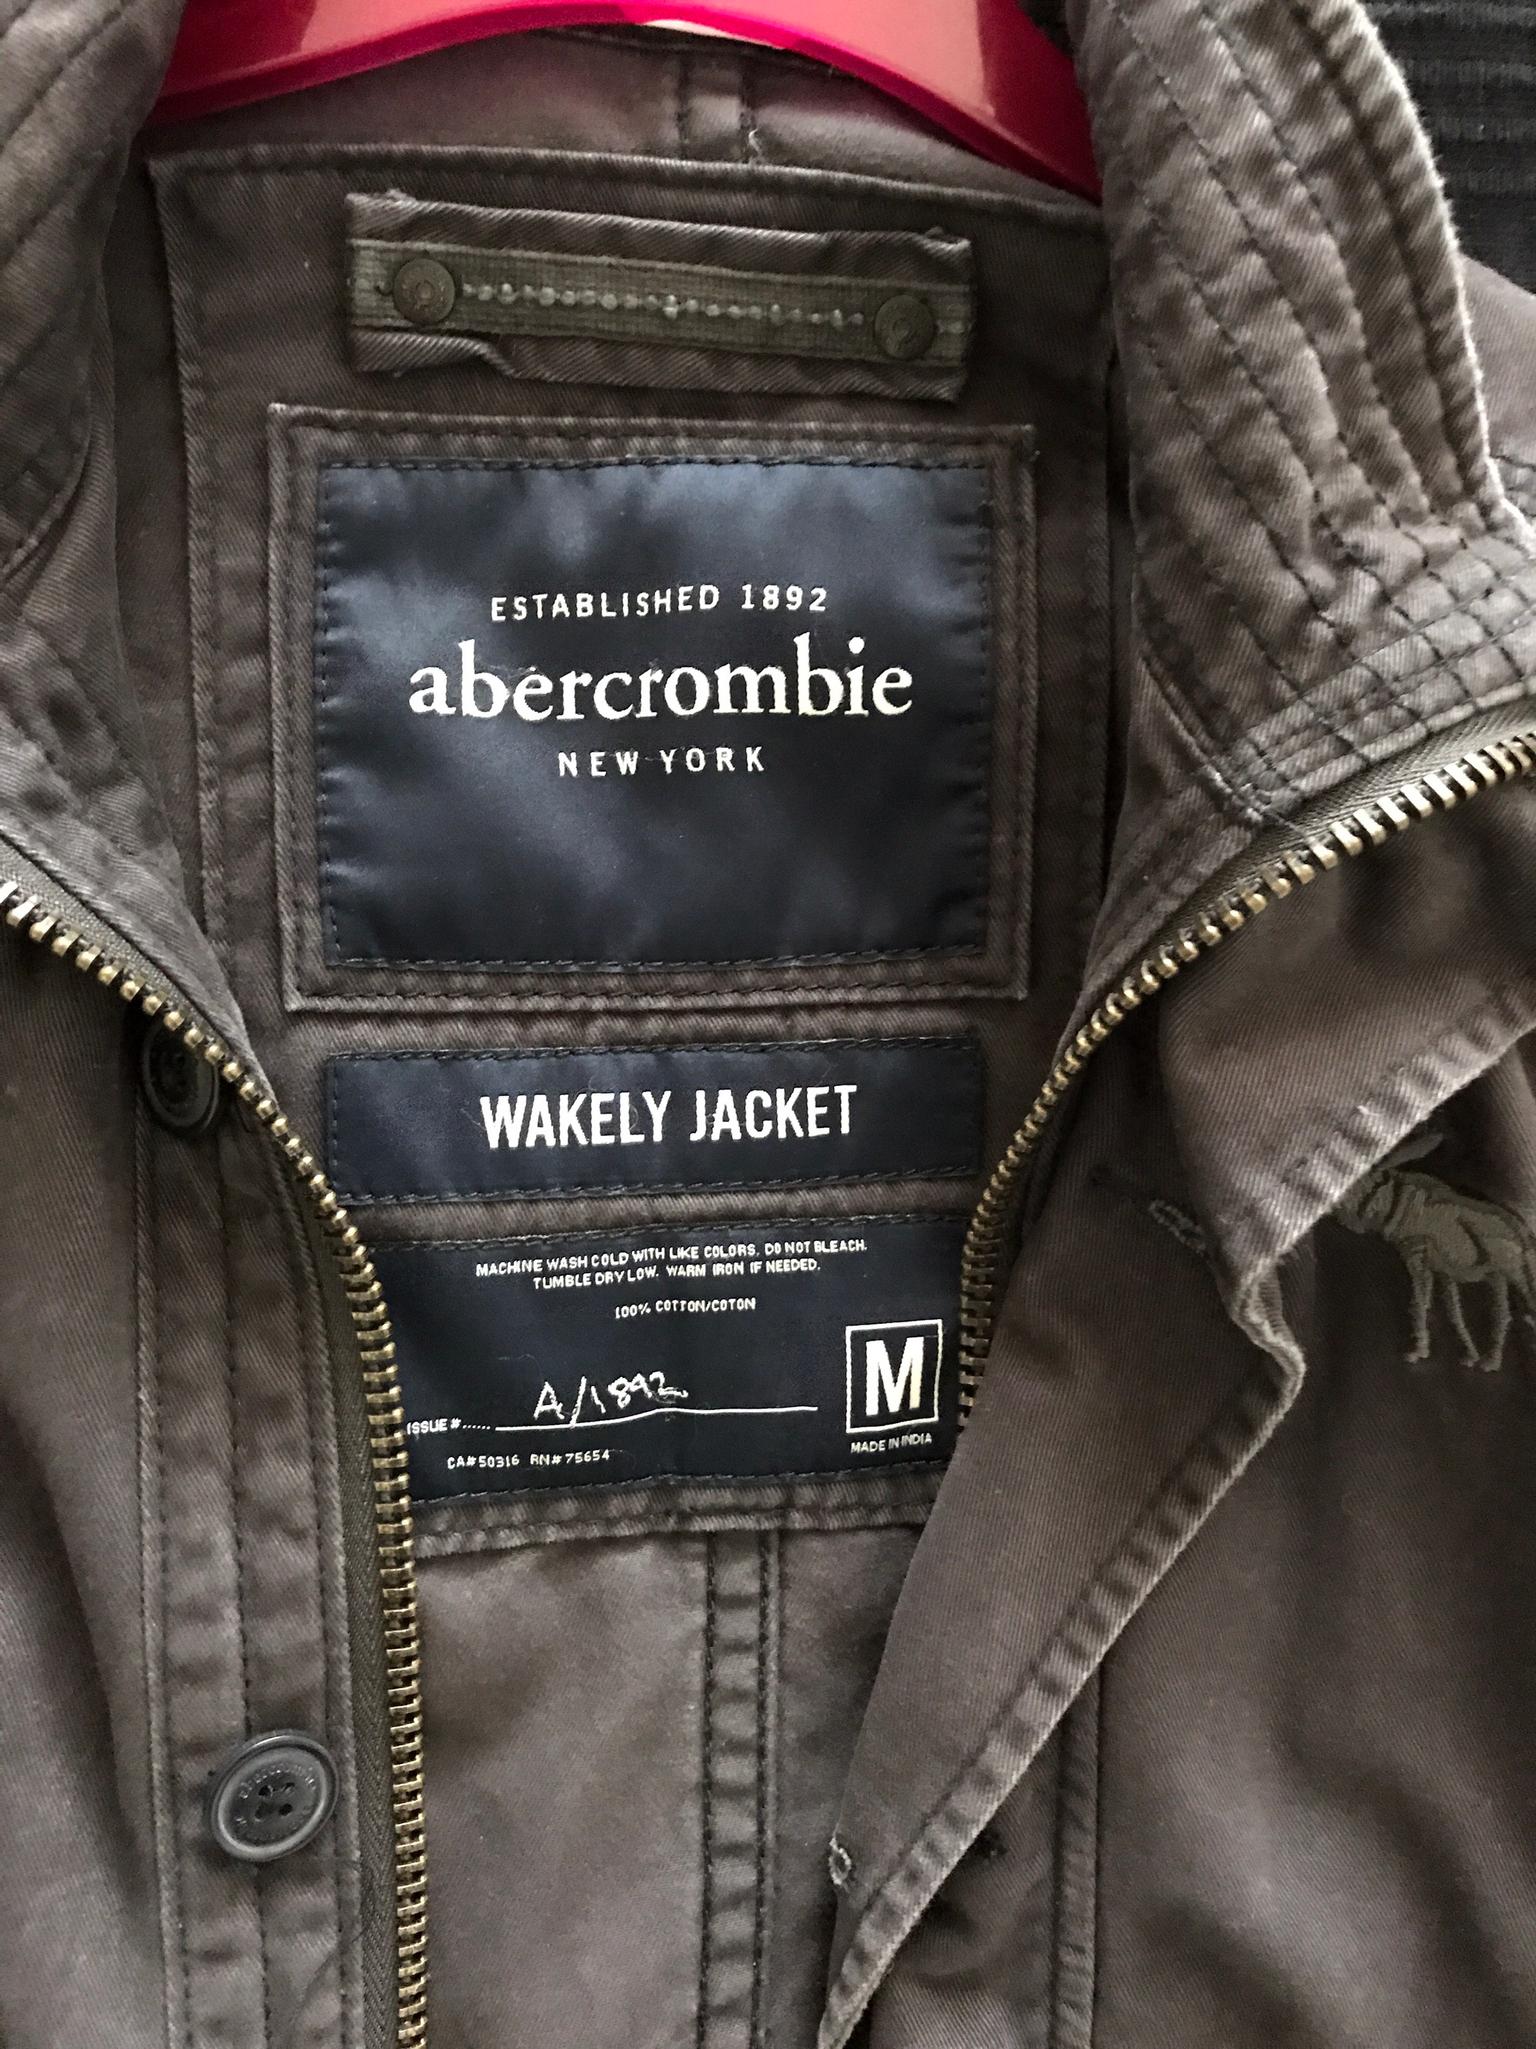 abercrombie and fitch india jackets